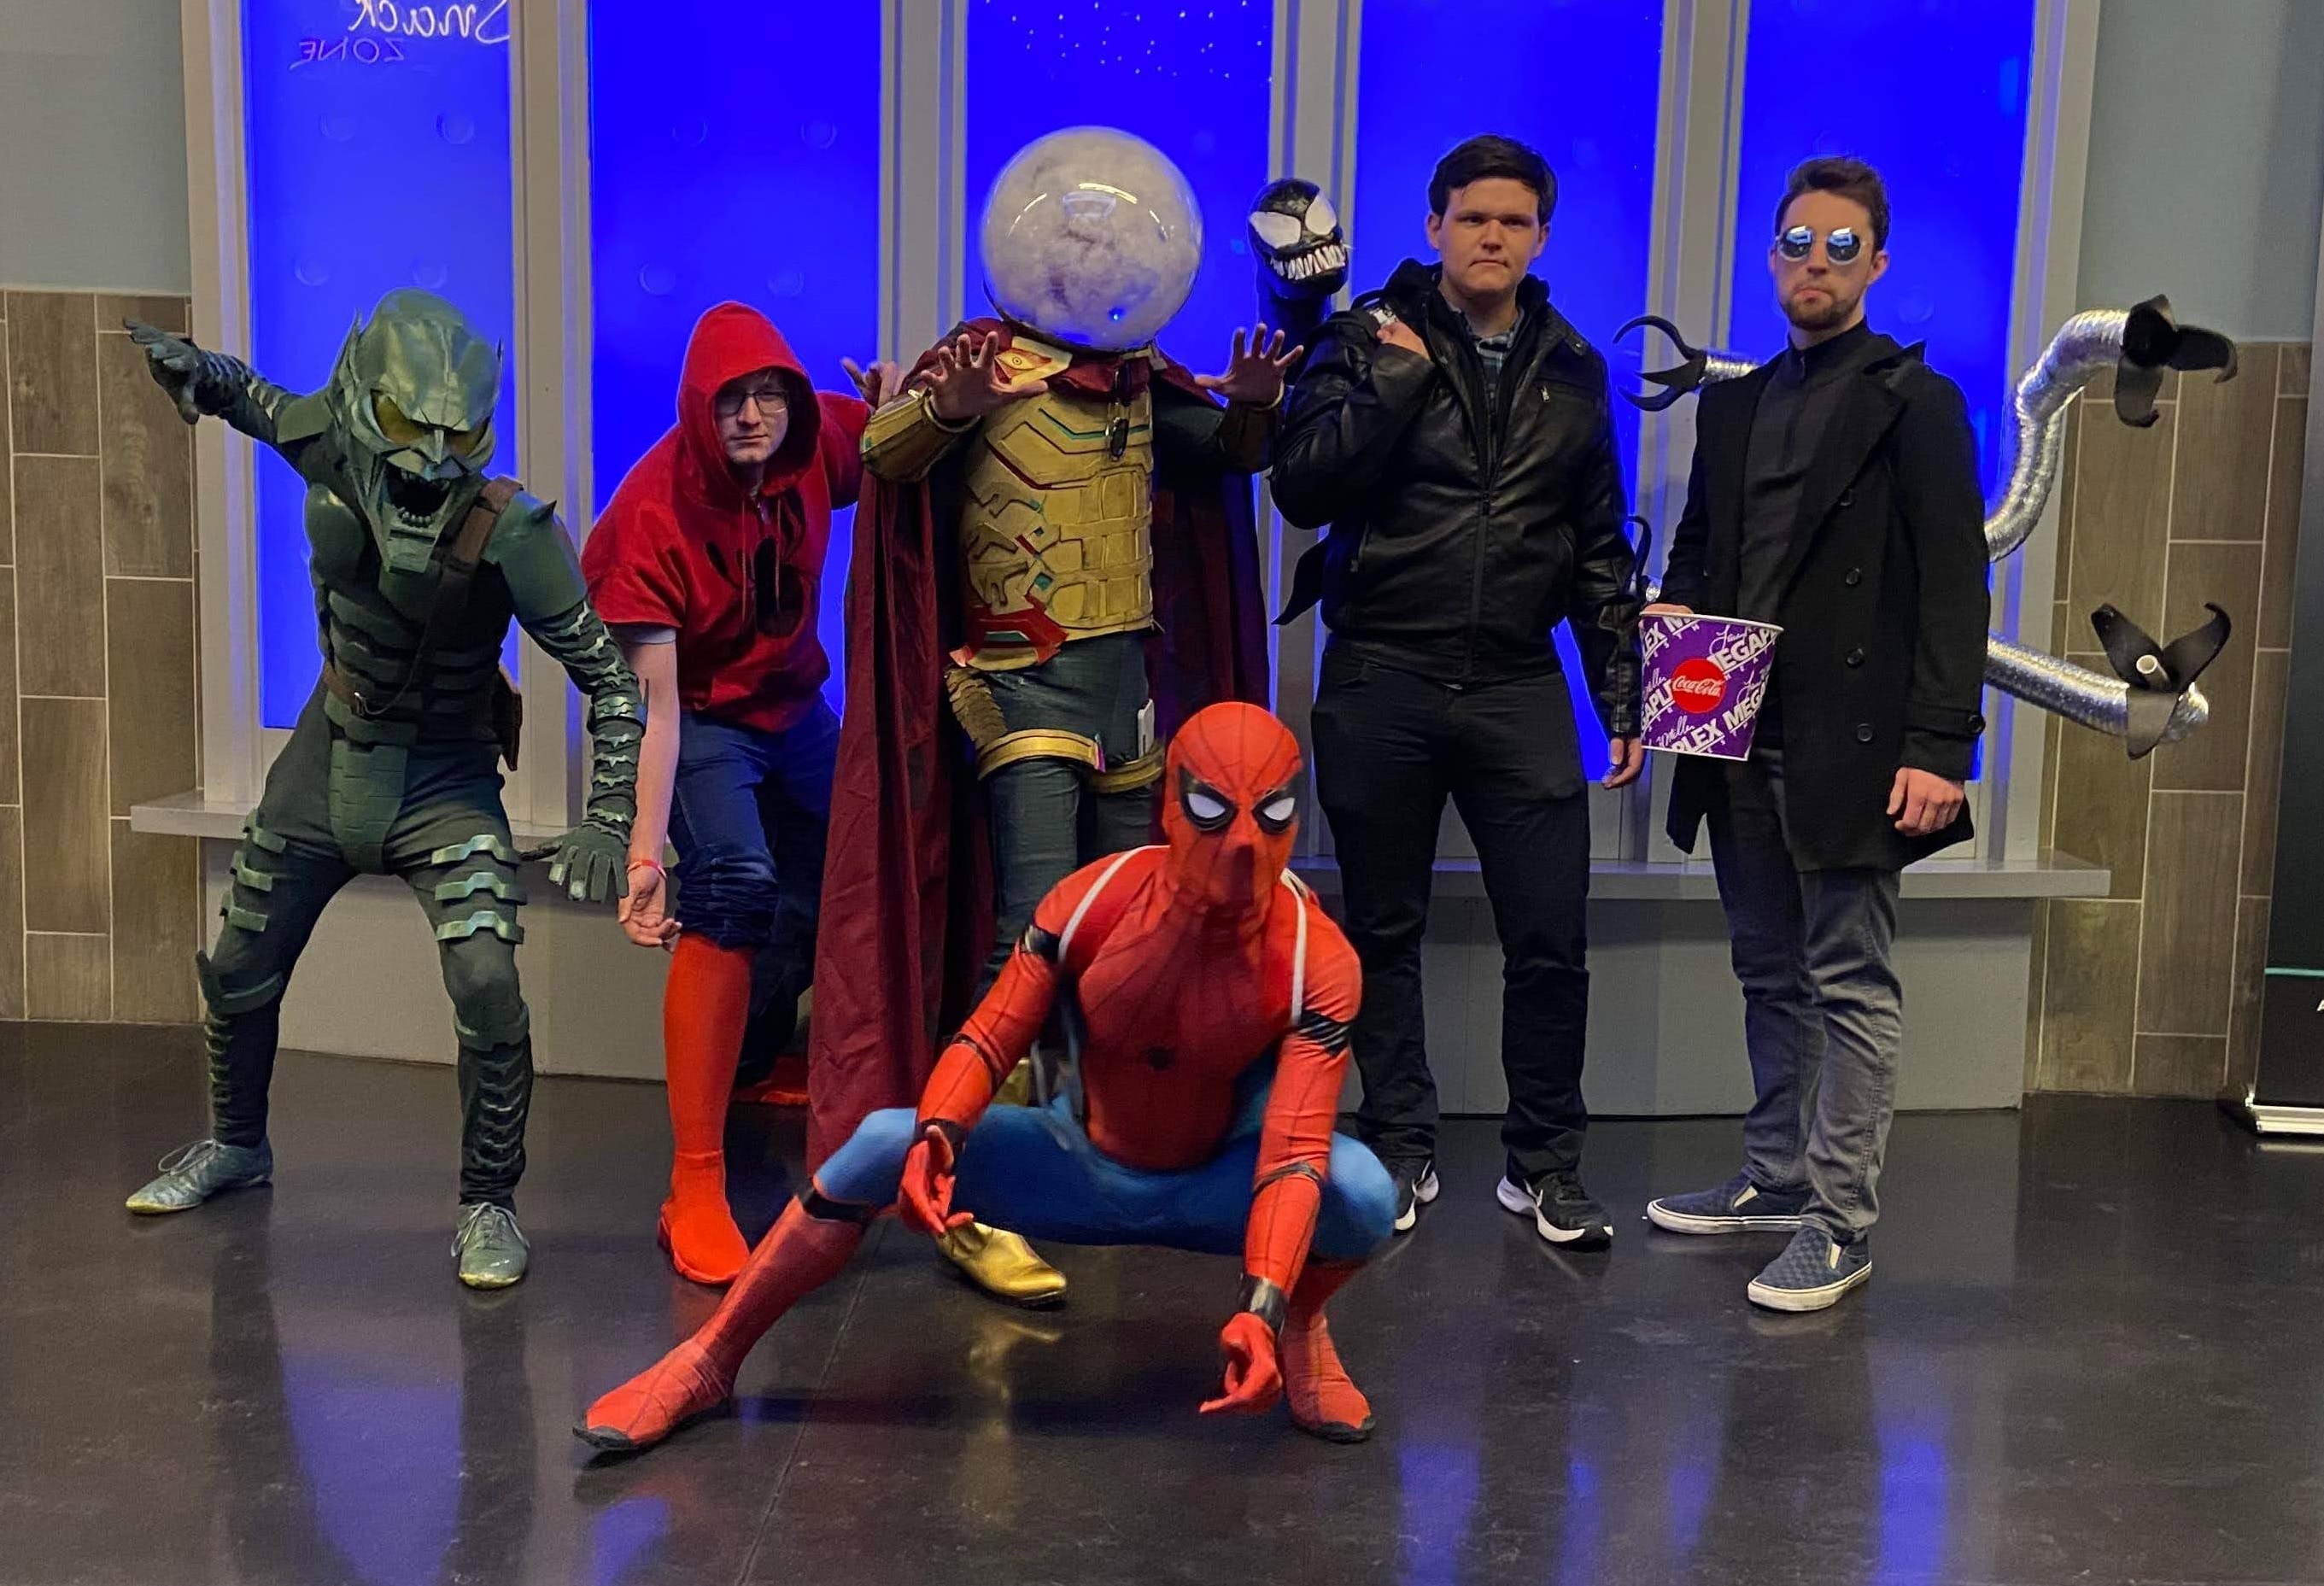 Group dresed as Spider-man Characters